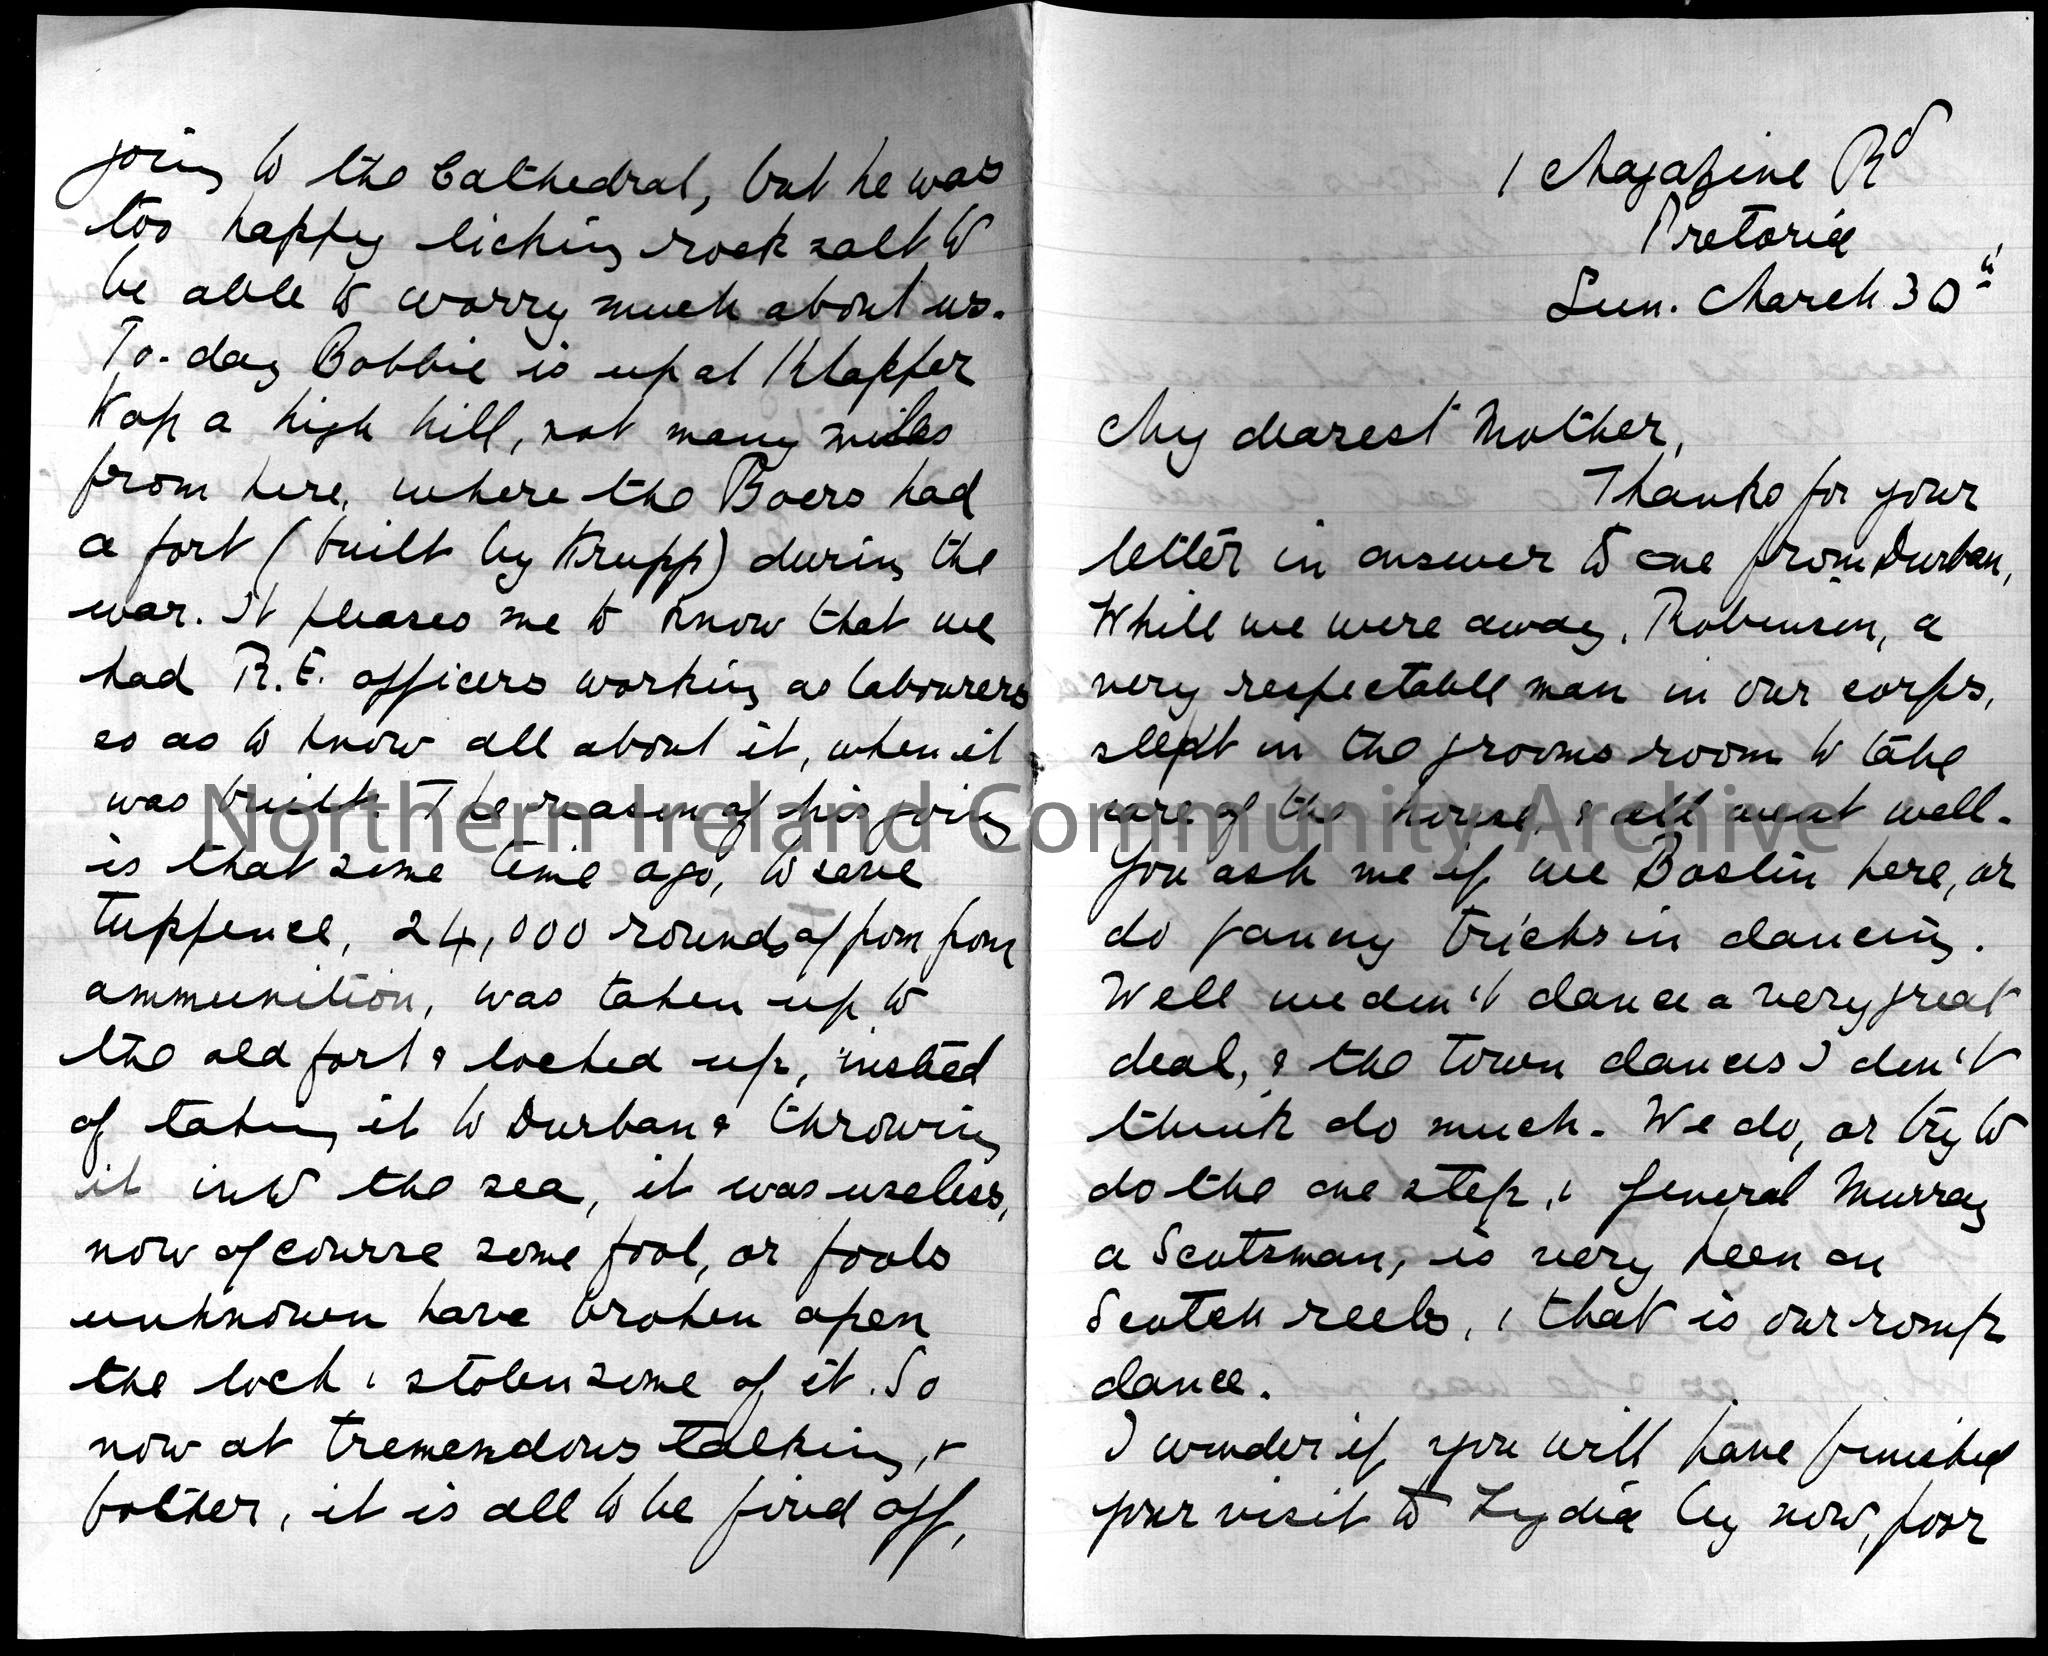 letter from Dorothy Arter Hezlet to her mother from 1 Magazine Road, Pretoria. Dated Sunday March 30th. Dorothy writes that she was in Durban, South A…